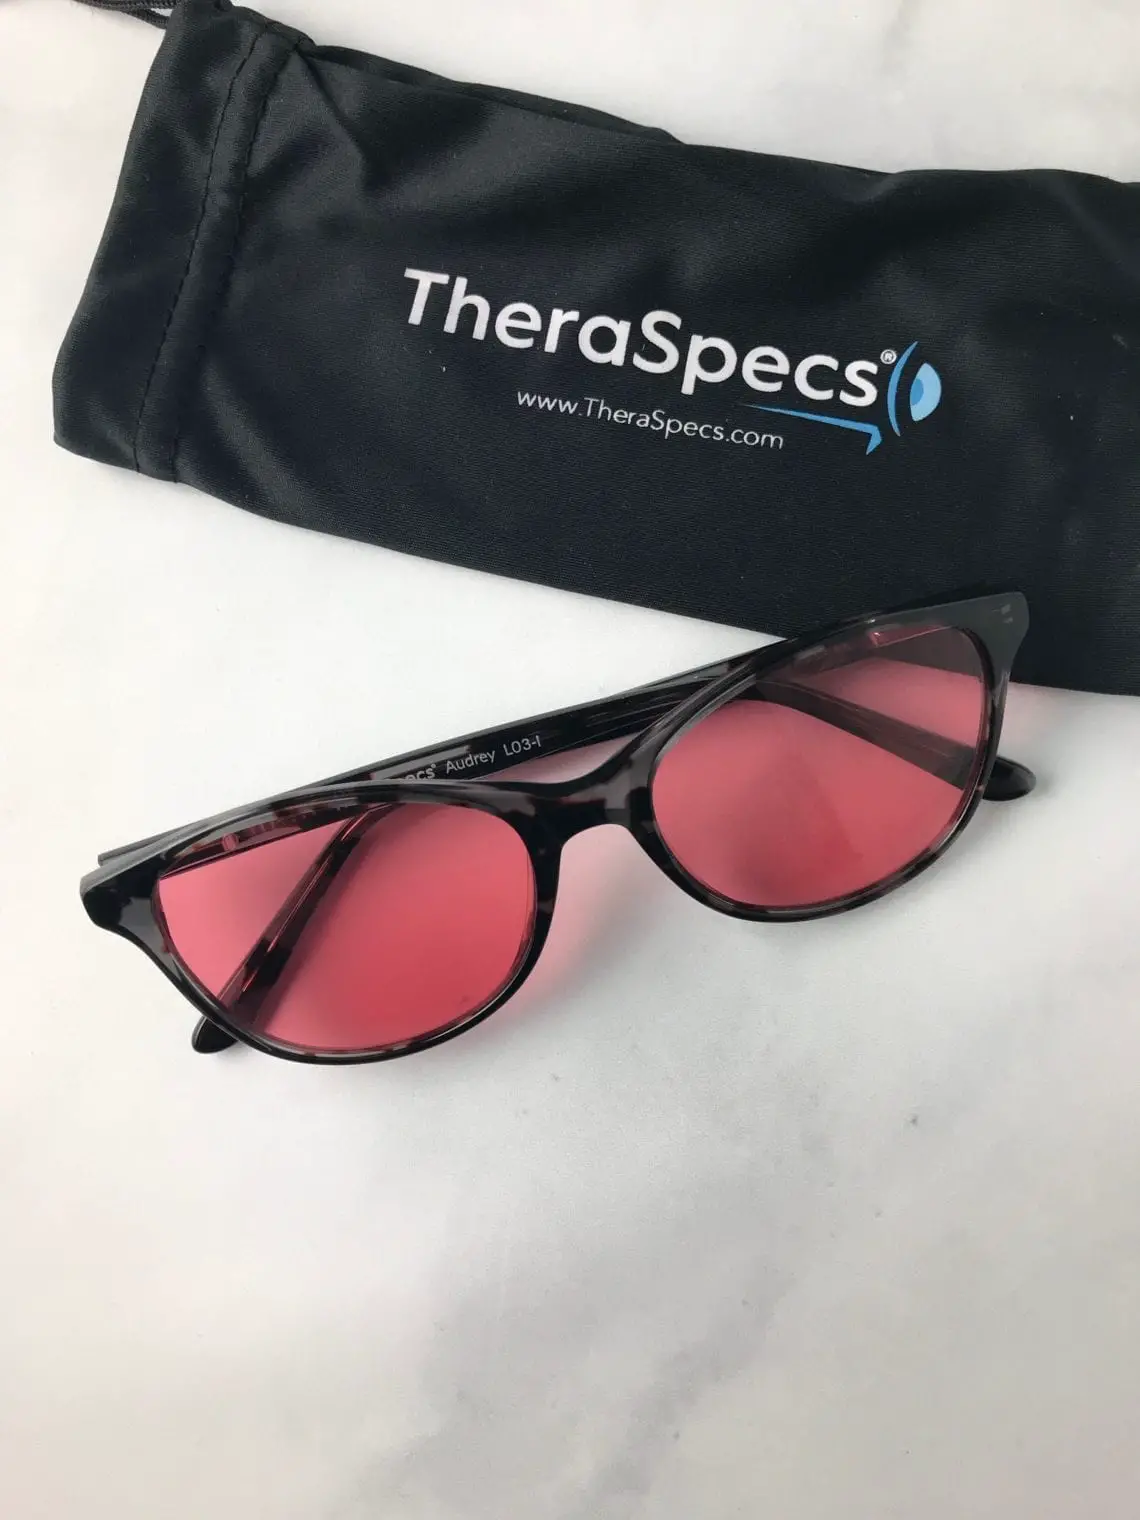 Migraine Glasses - A Review of Indoor and Outdoor TheraSpecs